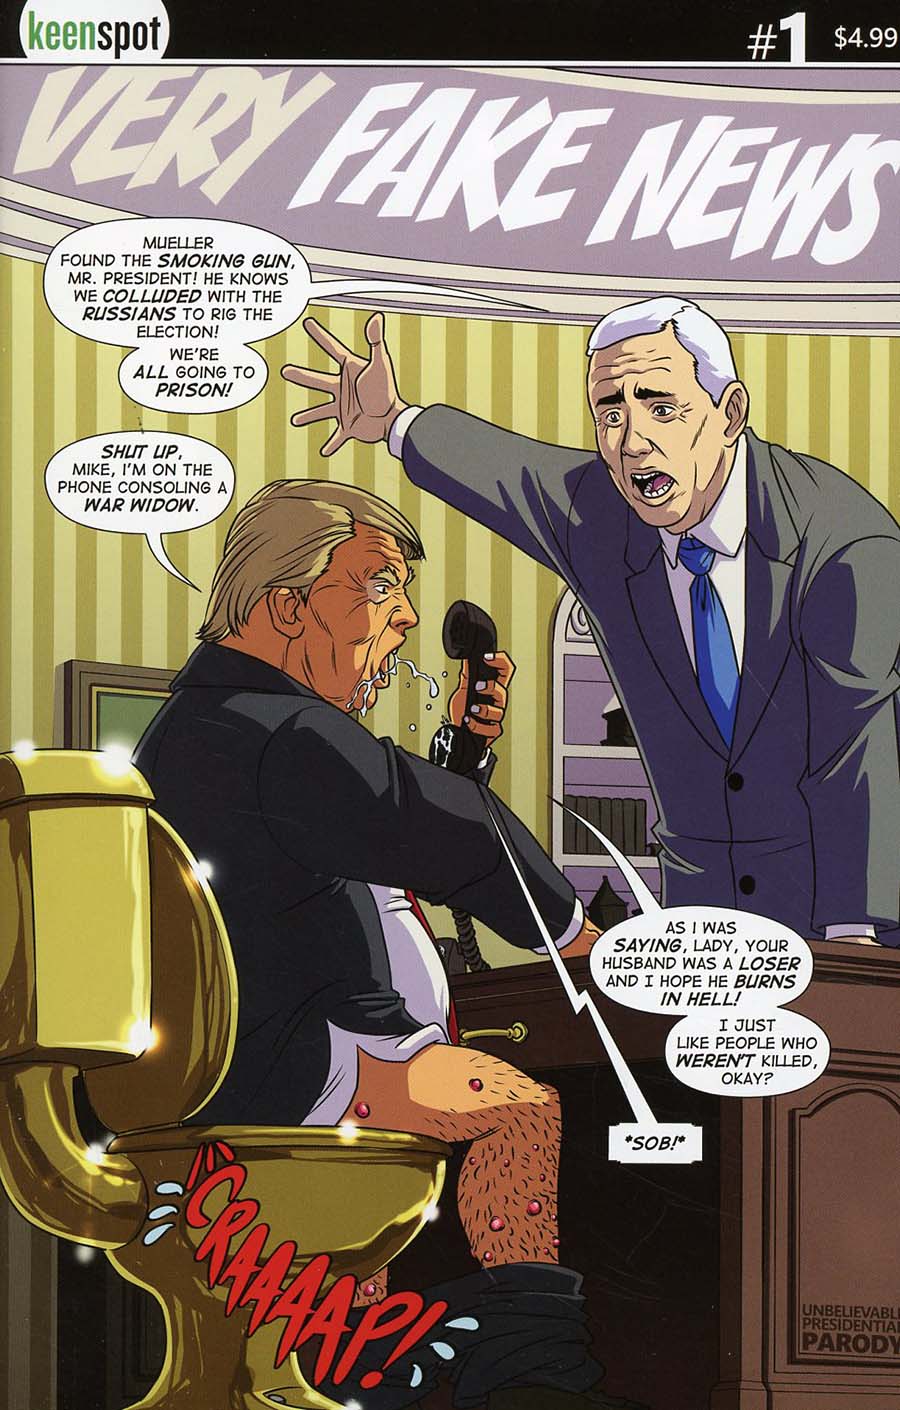 Trumps Titans #2 Cover C Variant Very Dishonest And Unfair Fake News Cover